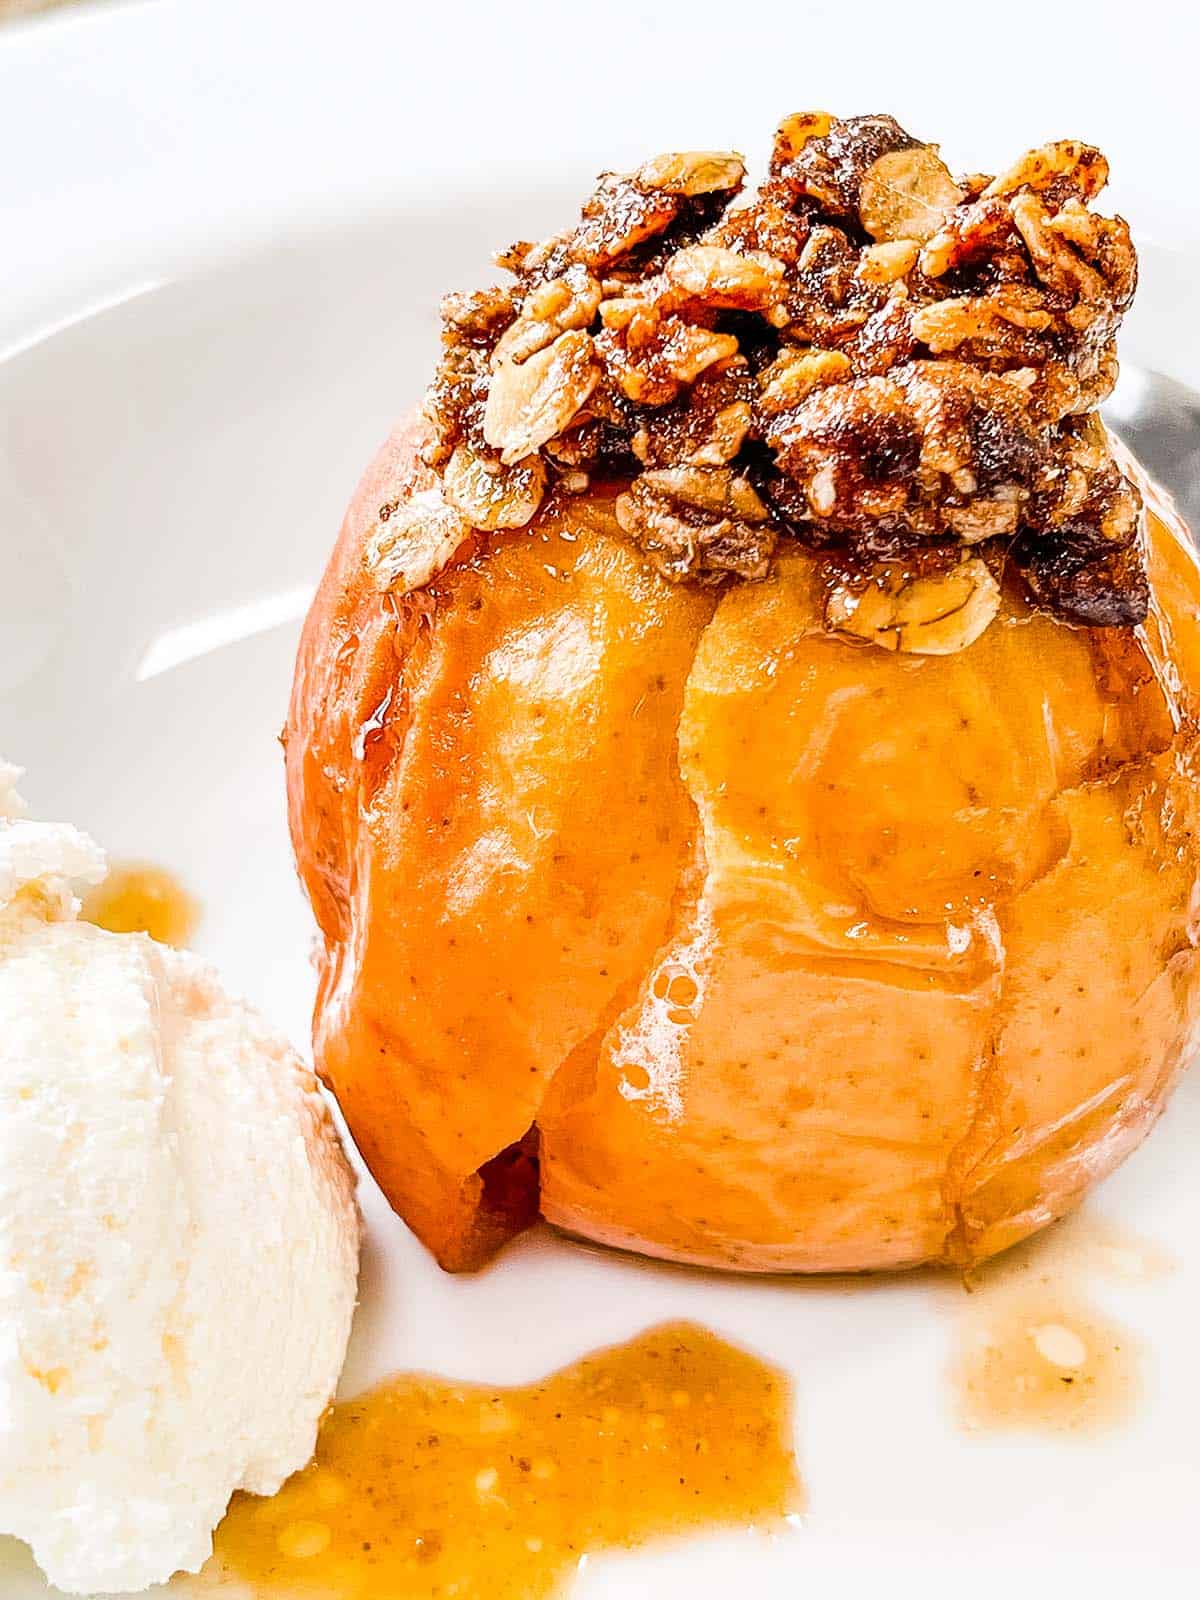 A baked apple with a side of ice cream.